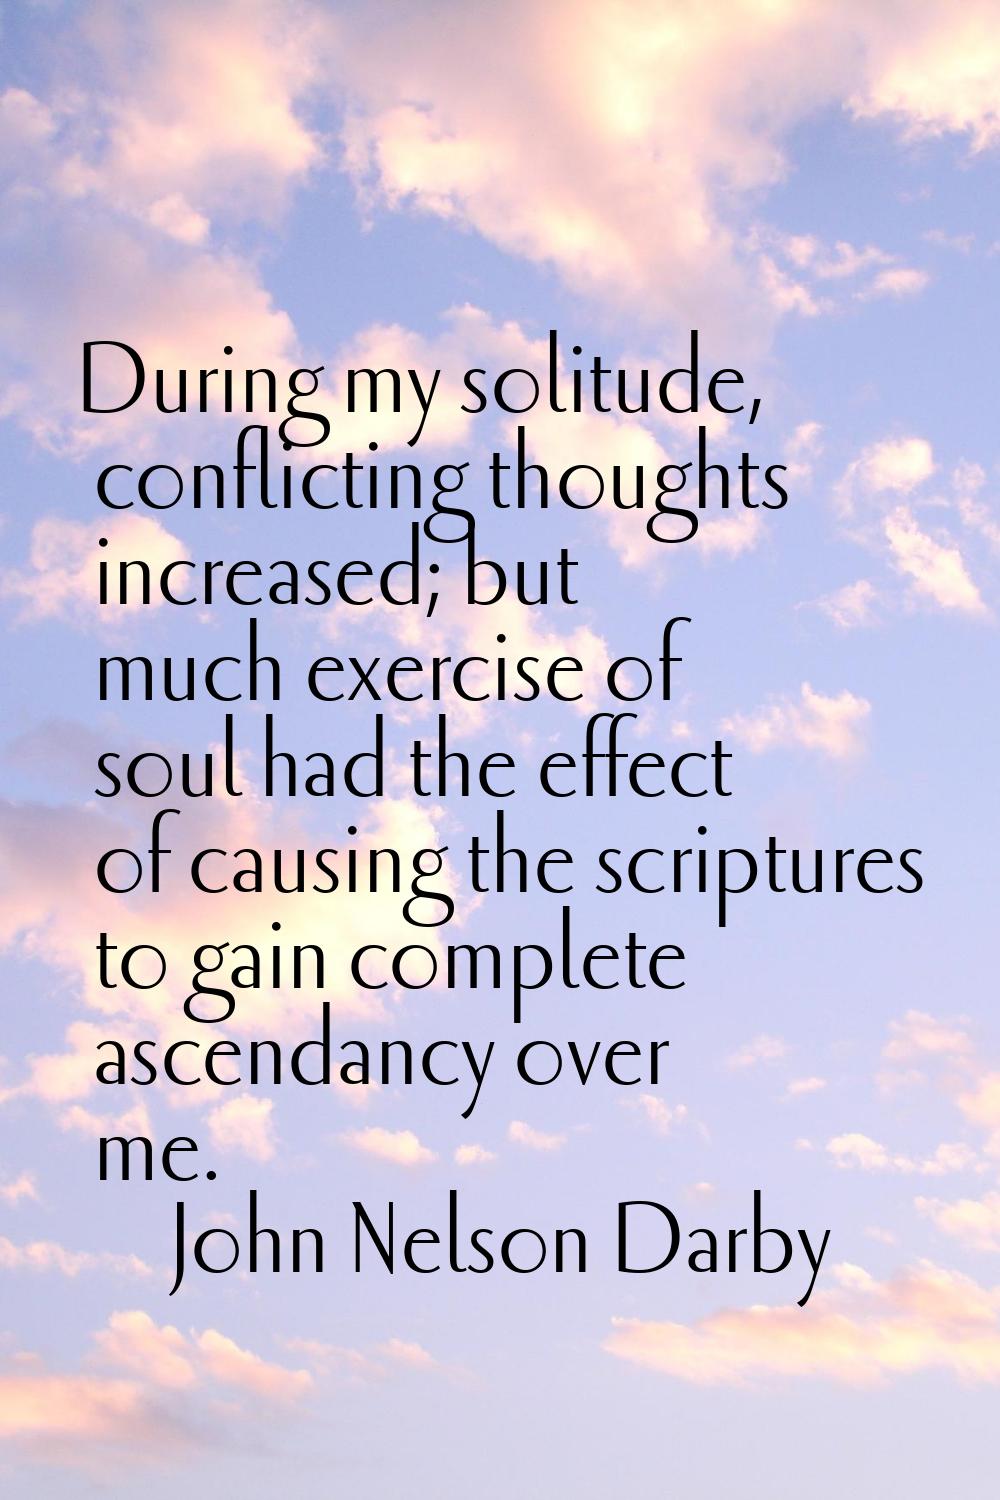 During my solitude, conflicting thoughts increased; but much exercise of soul had the effect of cau